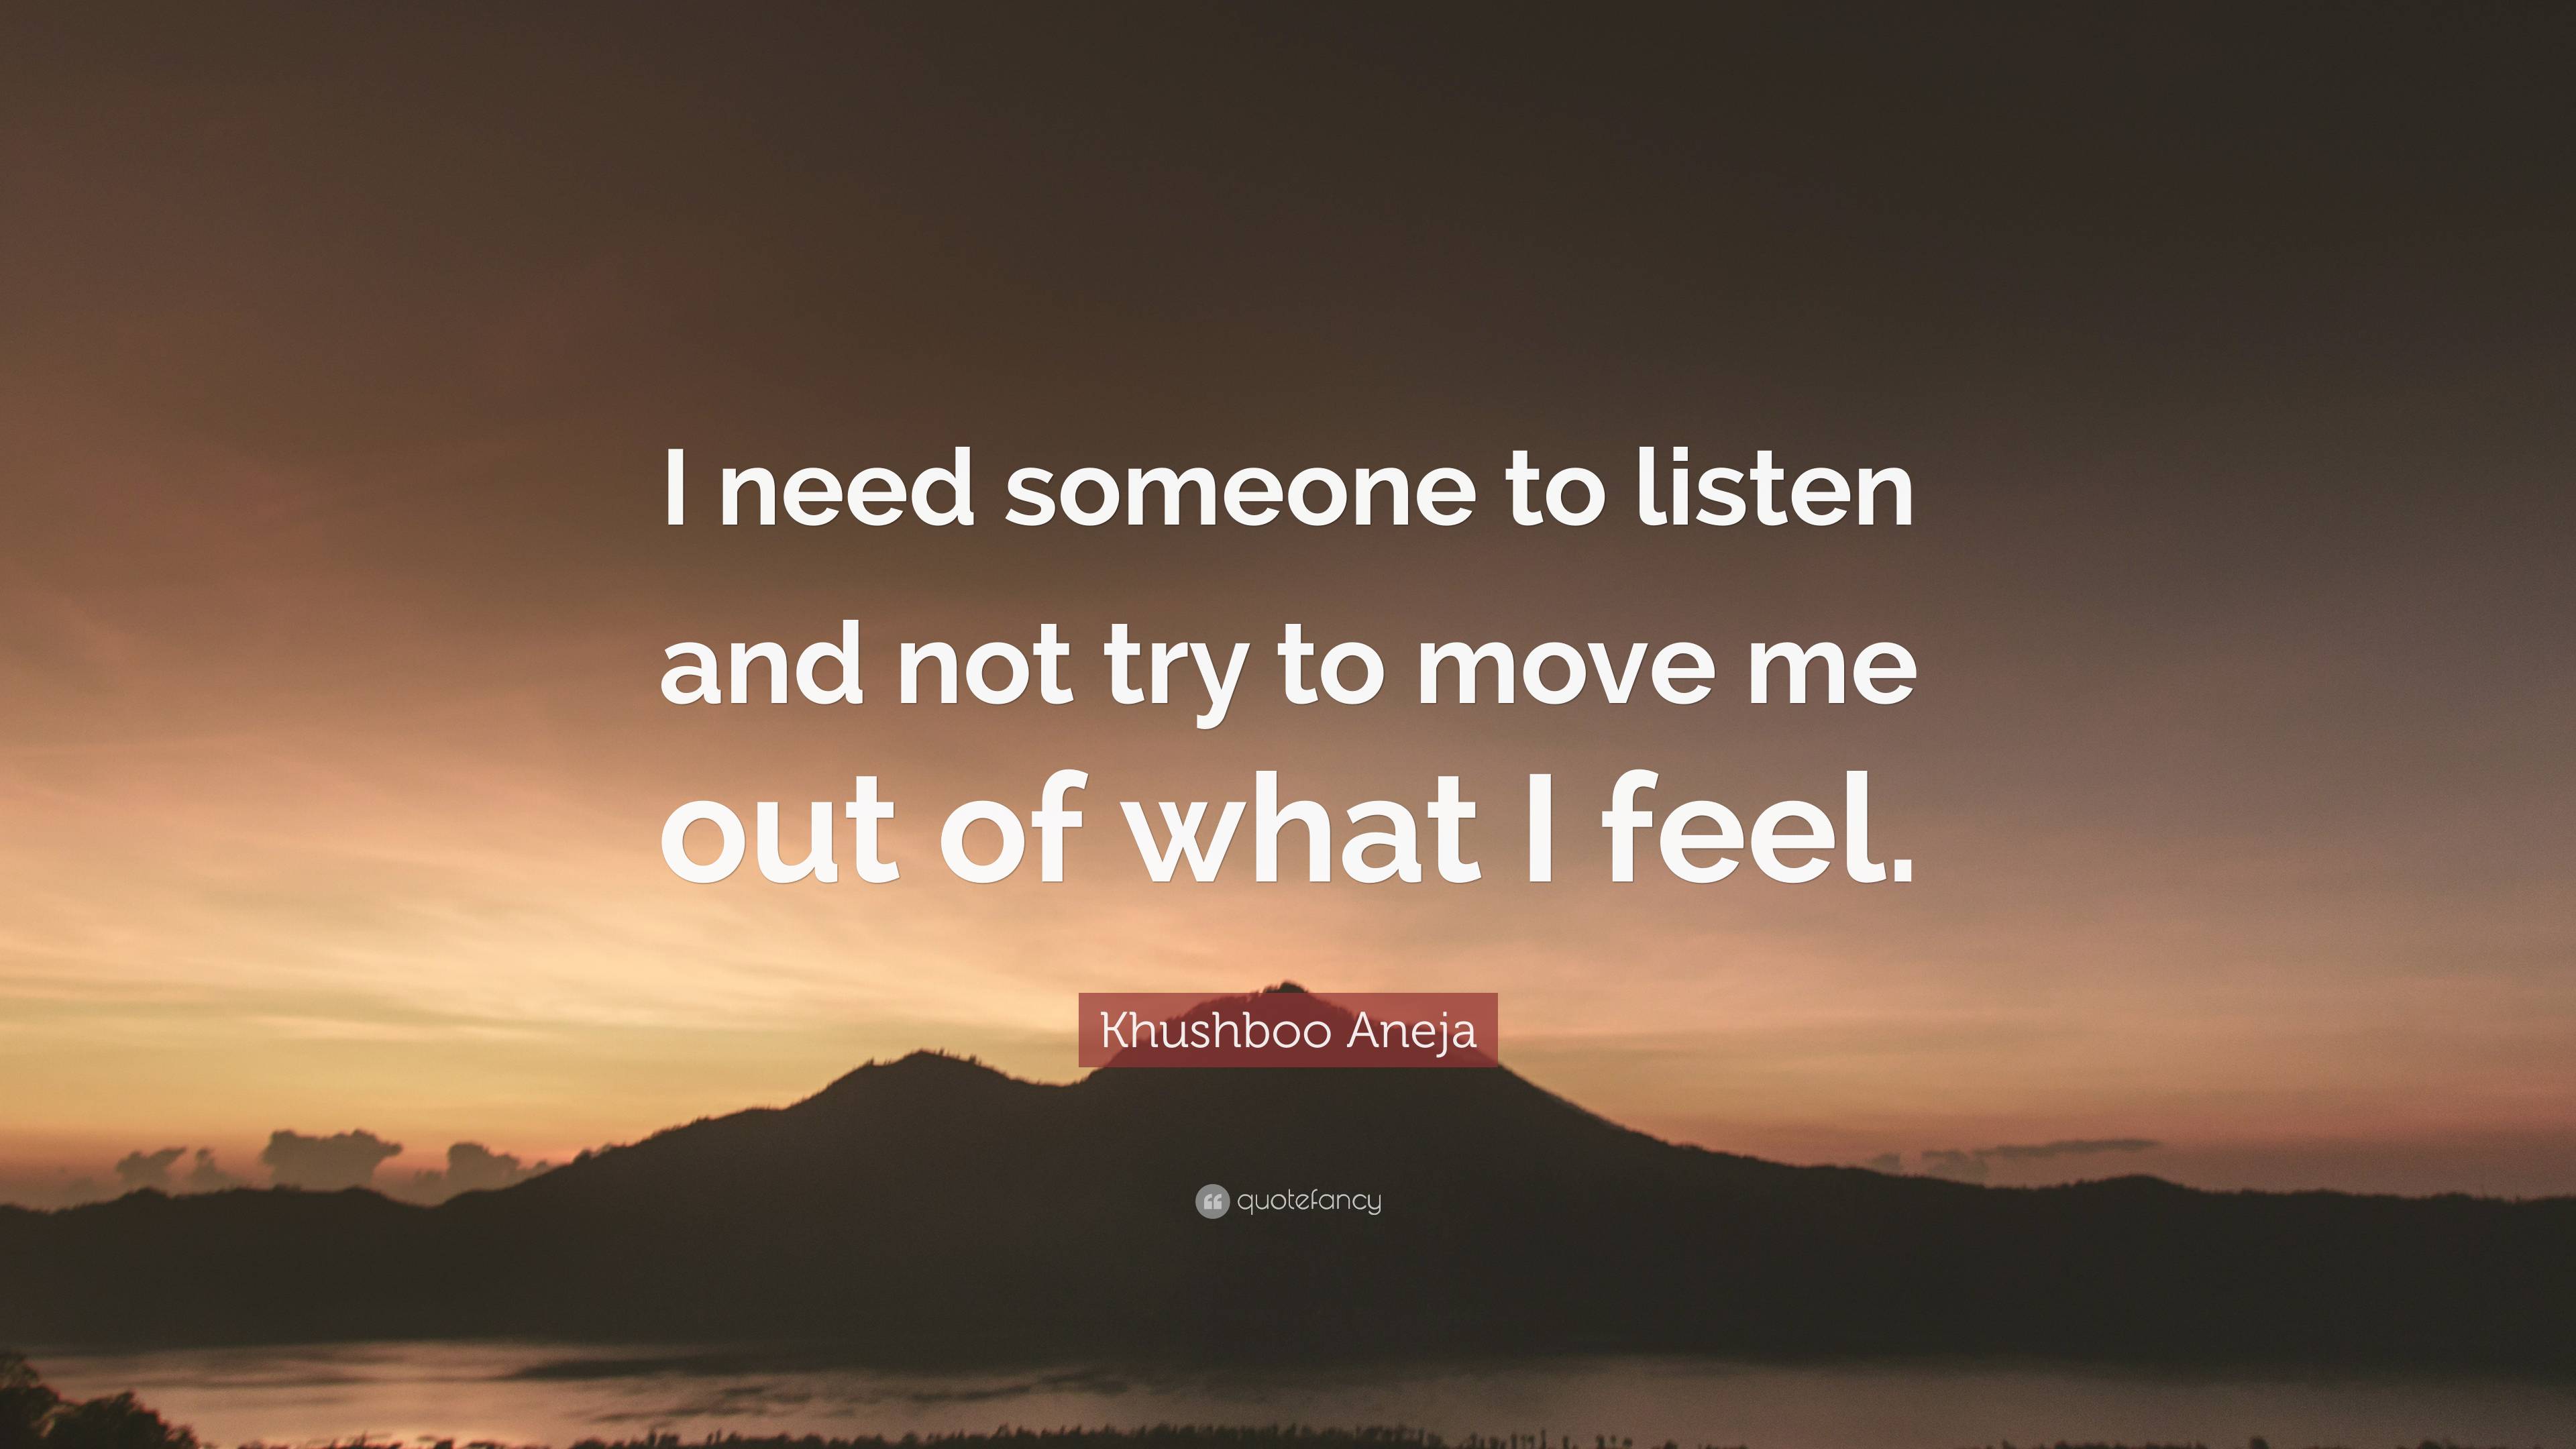 Khushboo Aneja Quote: “I need someone to listen and not try to move me ...